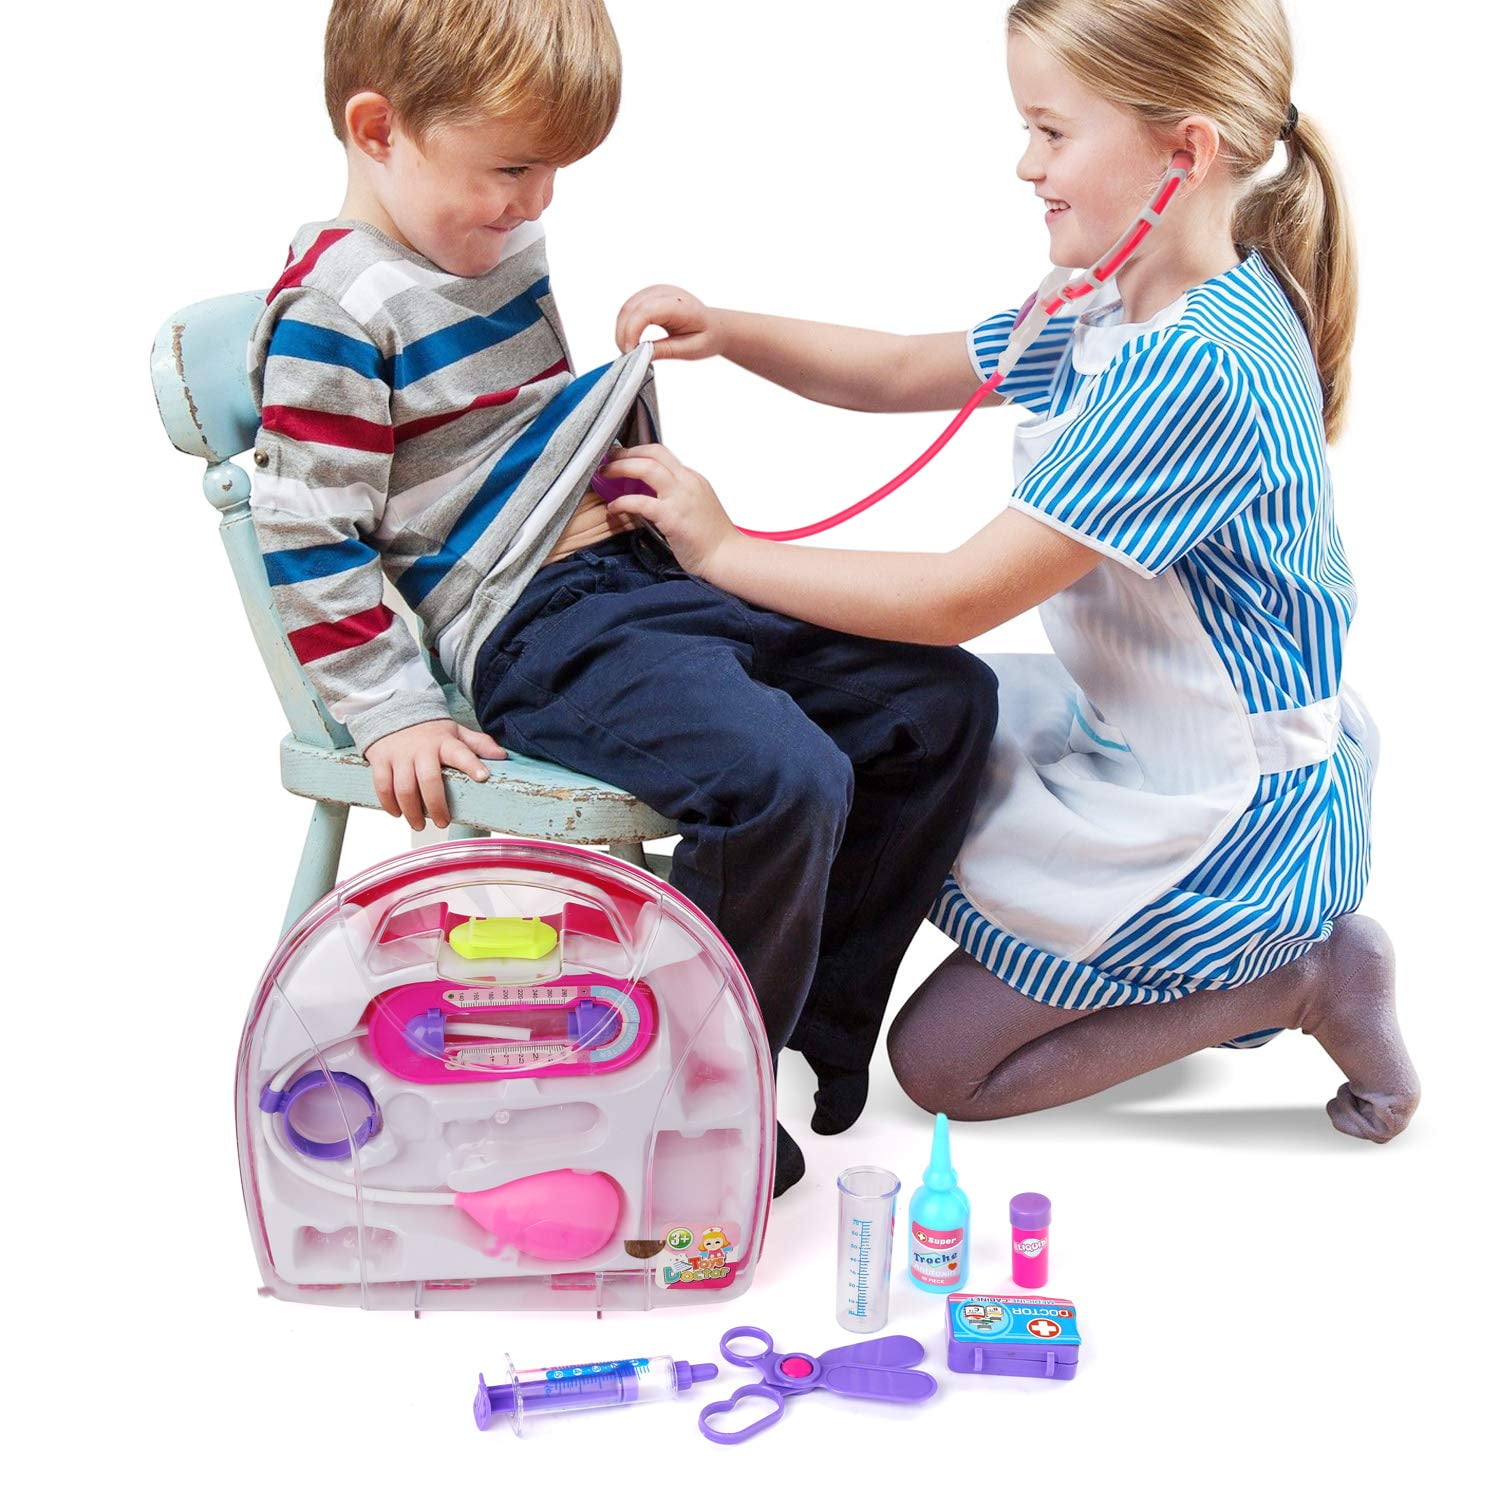 1PC Medical Stethoscope Nurse Children Kids Toy Pretend Play Medical Toys Gifts 